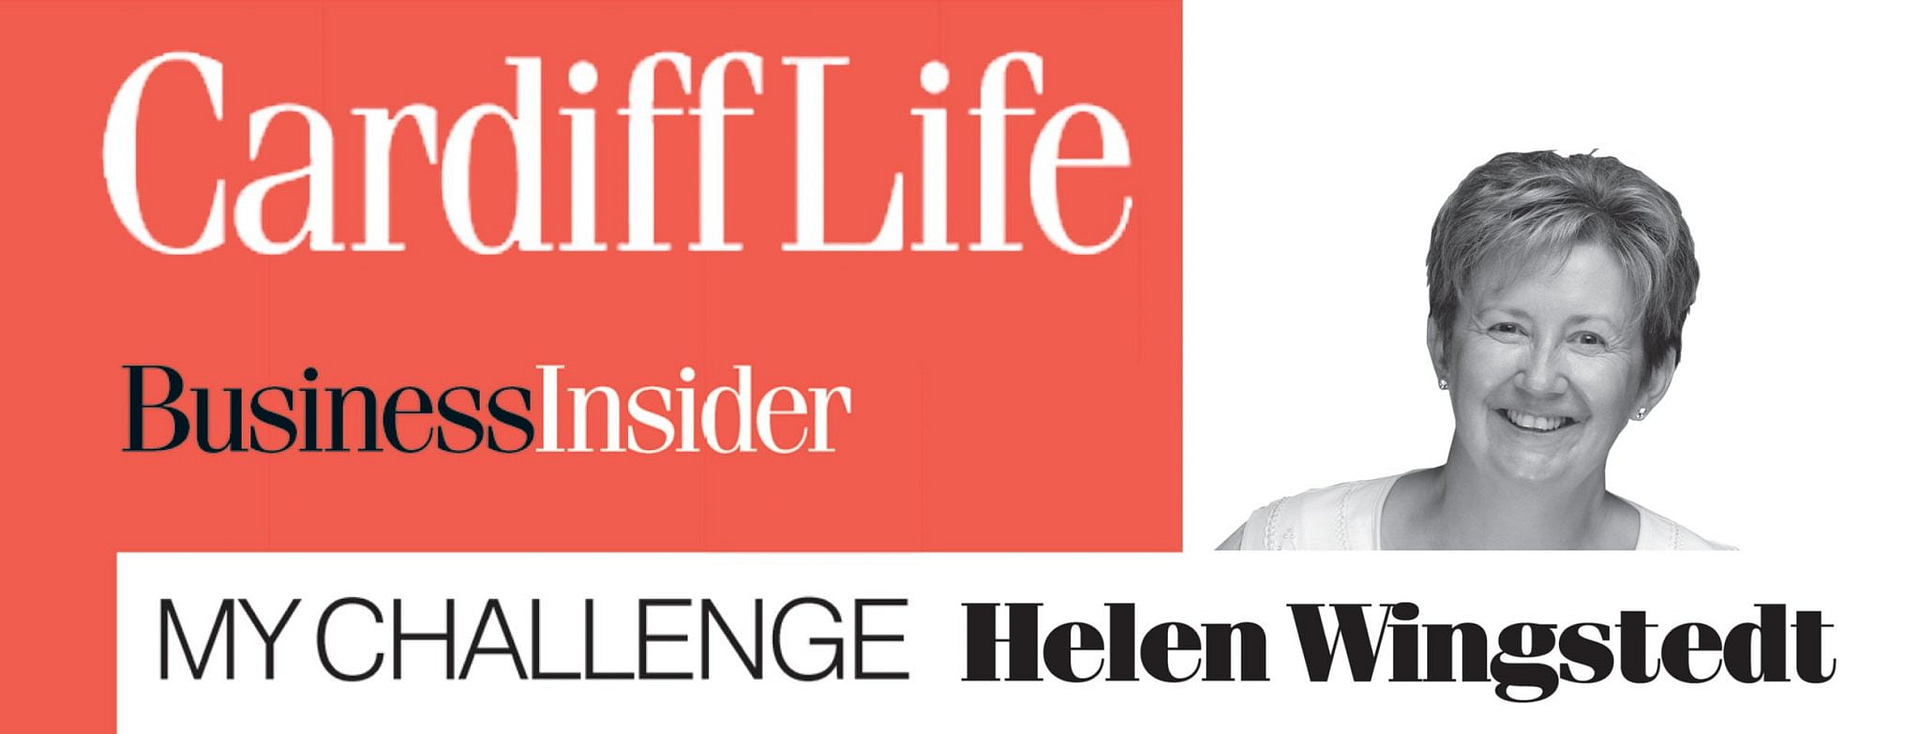 Helen Wingstedt press Cardiff Life Business Insider